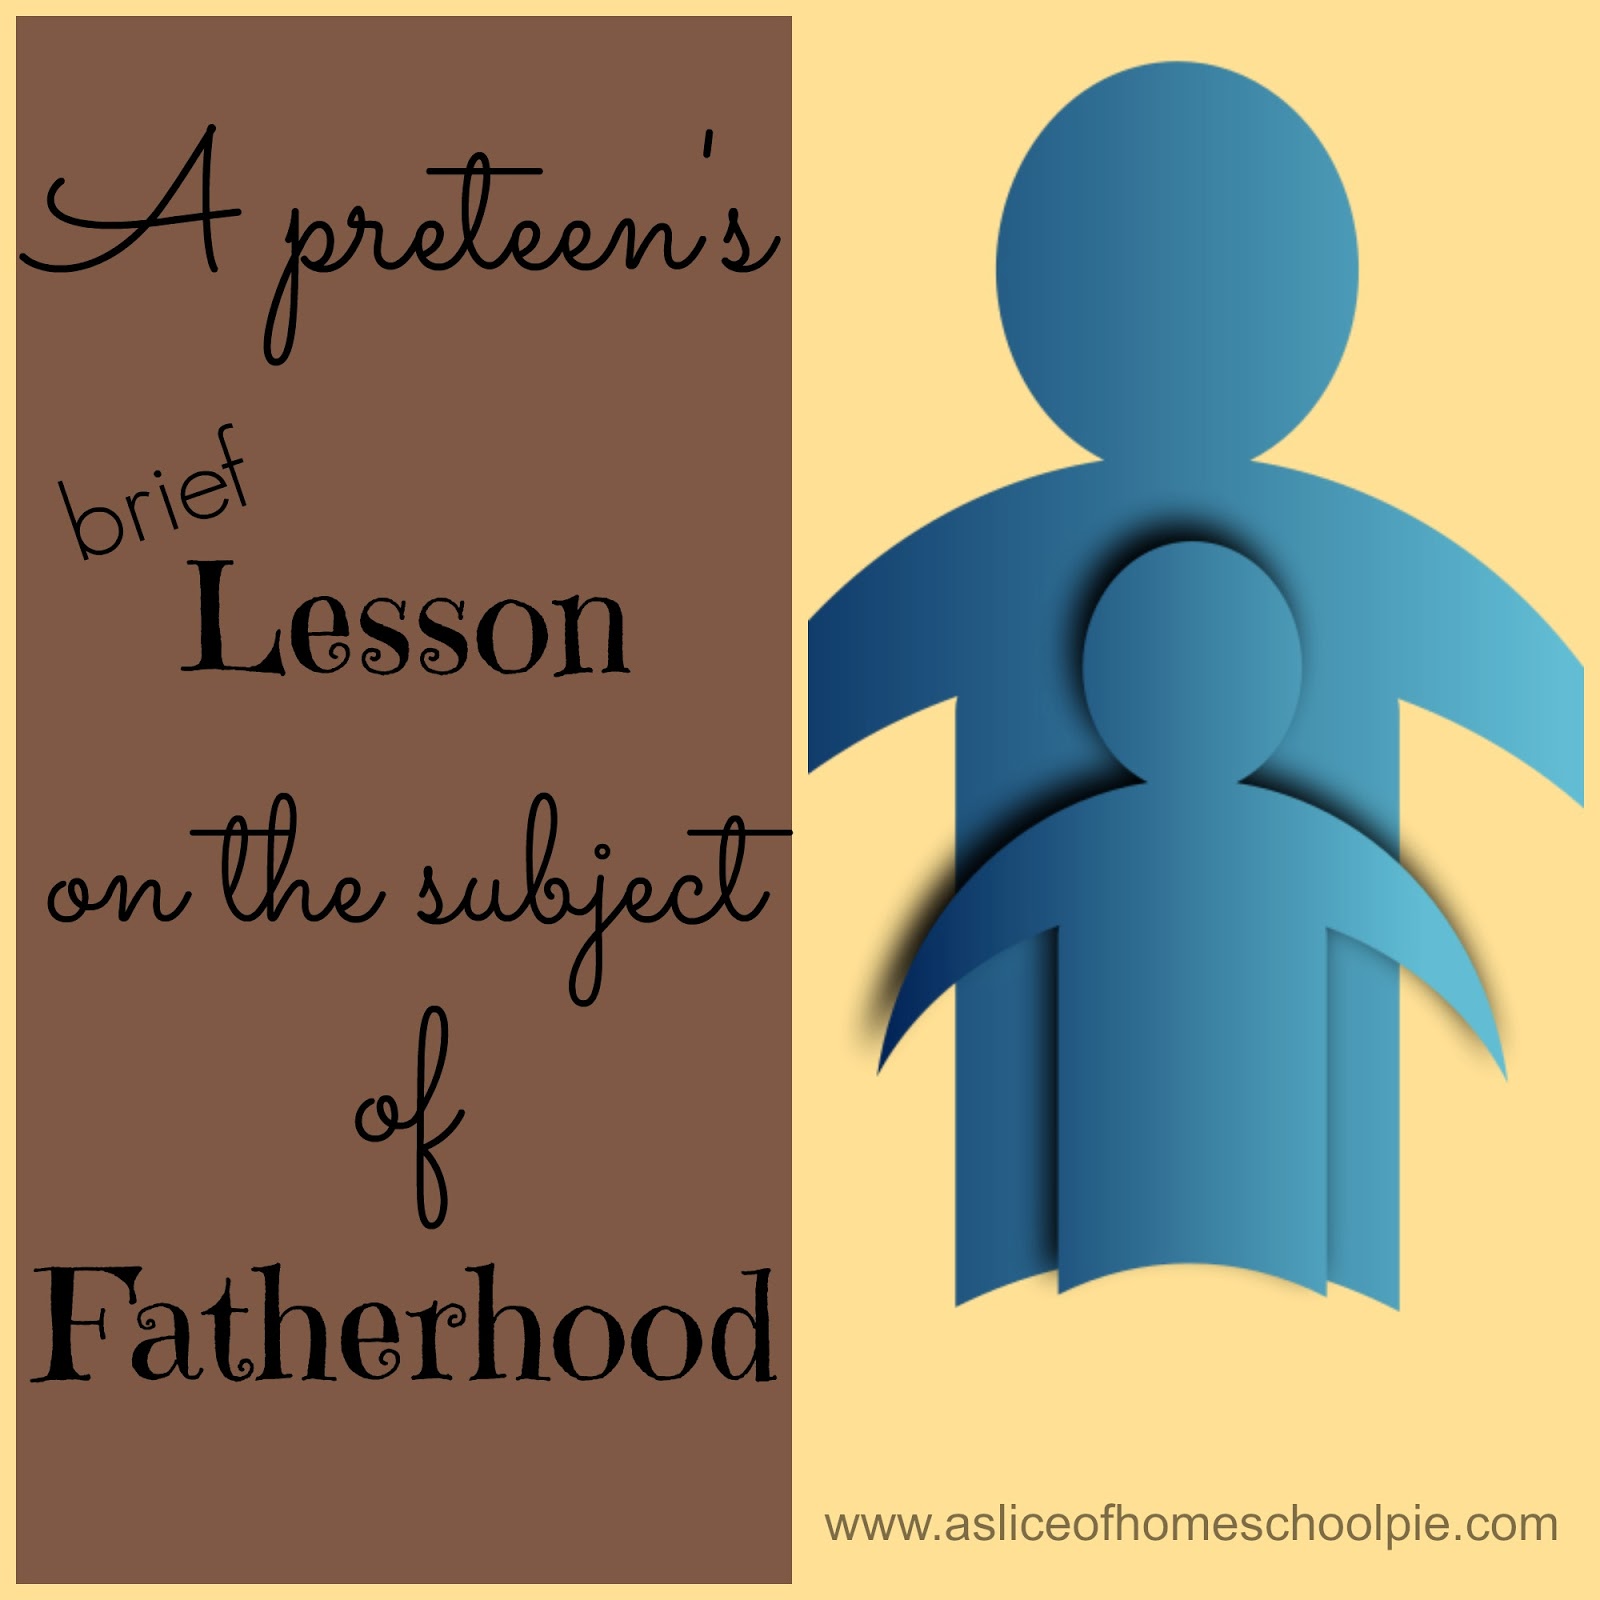 Preteen's Brief Lesson on the Subject of Fatherhood by ASliceOfHomeschoolPie.com #raisingboys #parenting